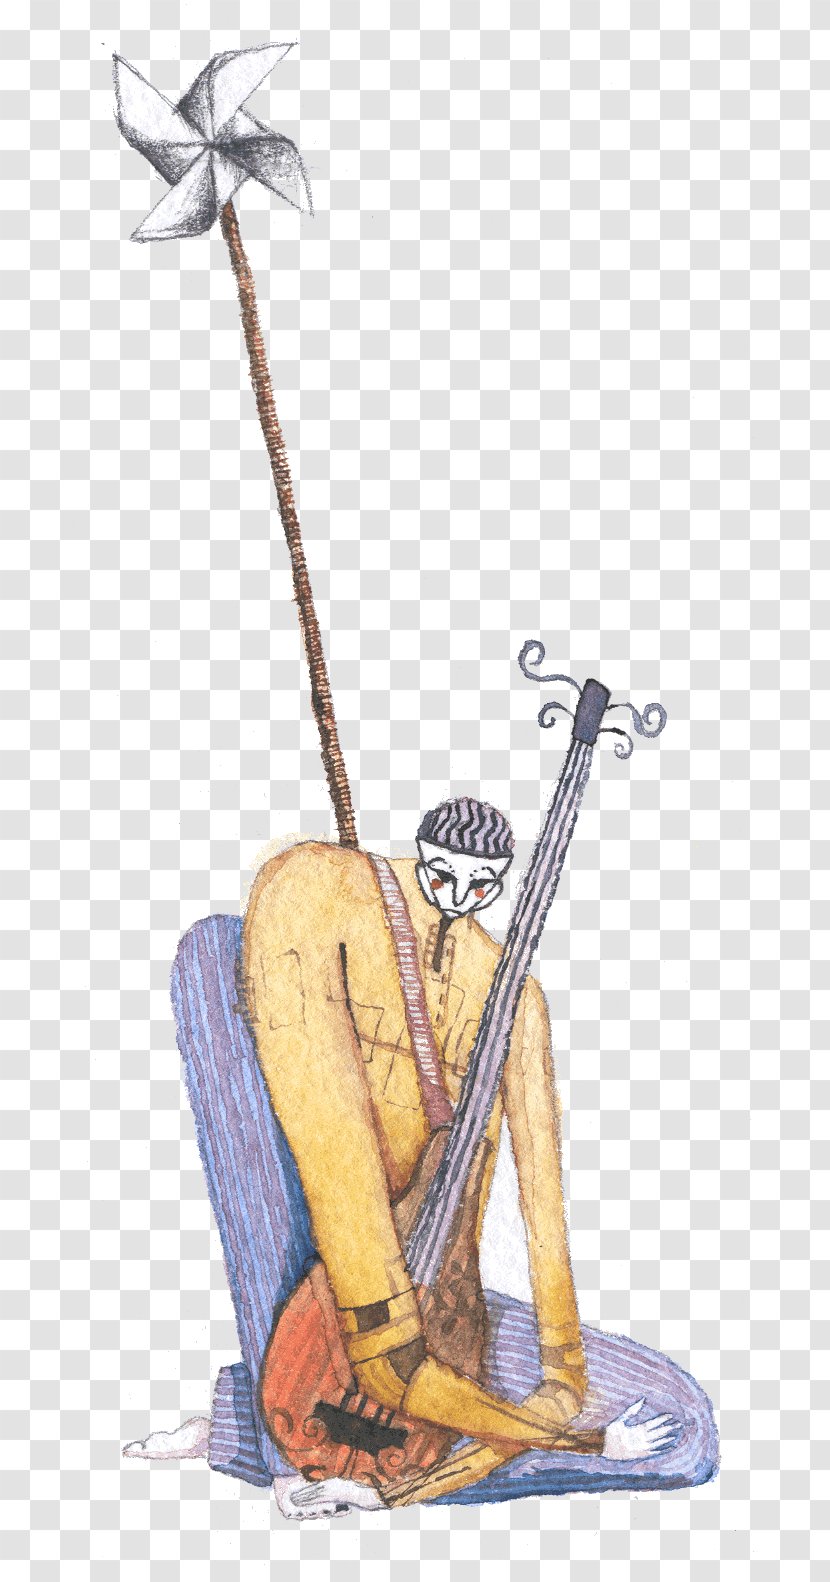 Plucked String Instrument Cartoon Instruments - Polygraphy Transparent PNG